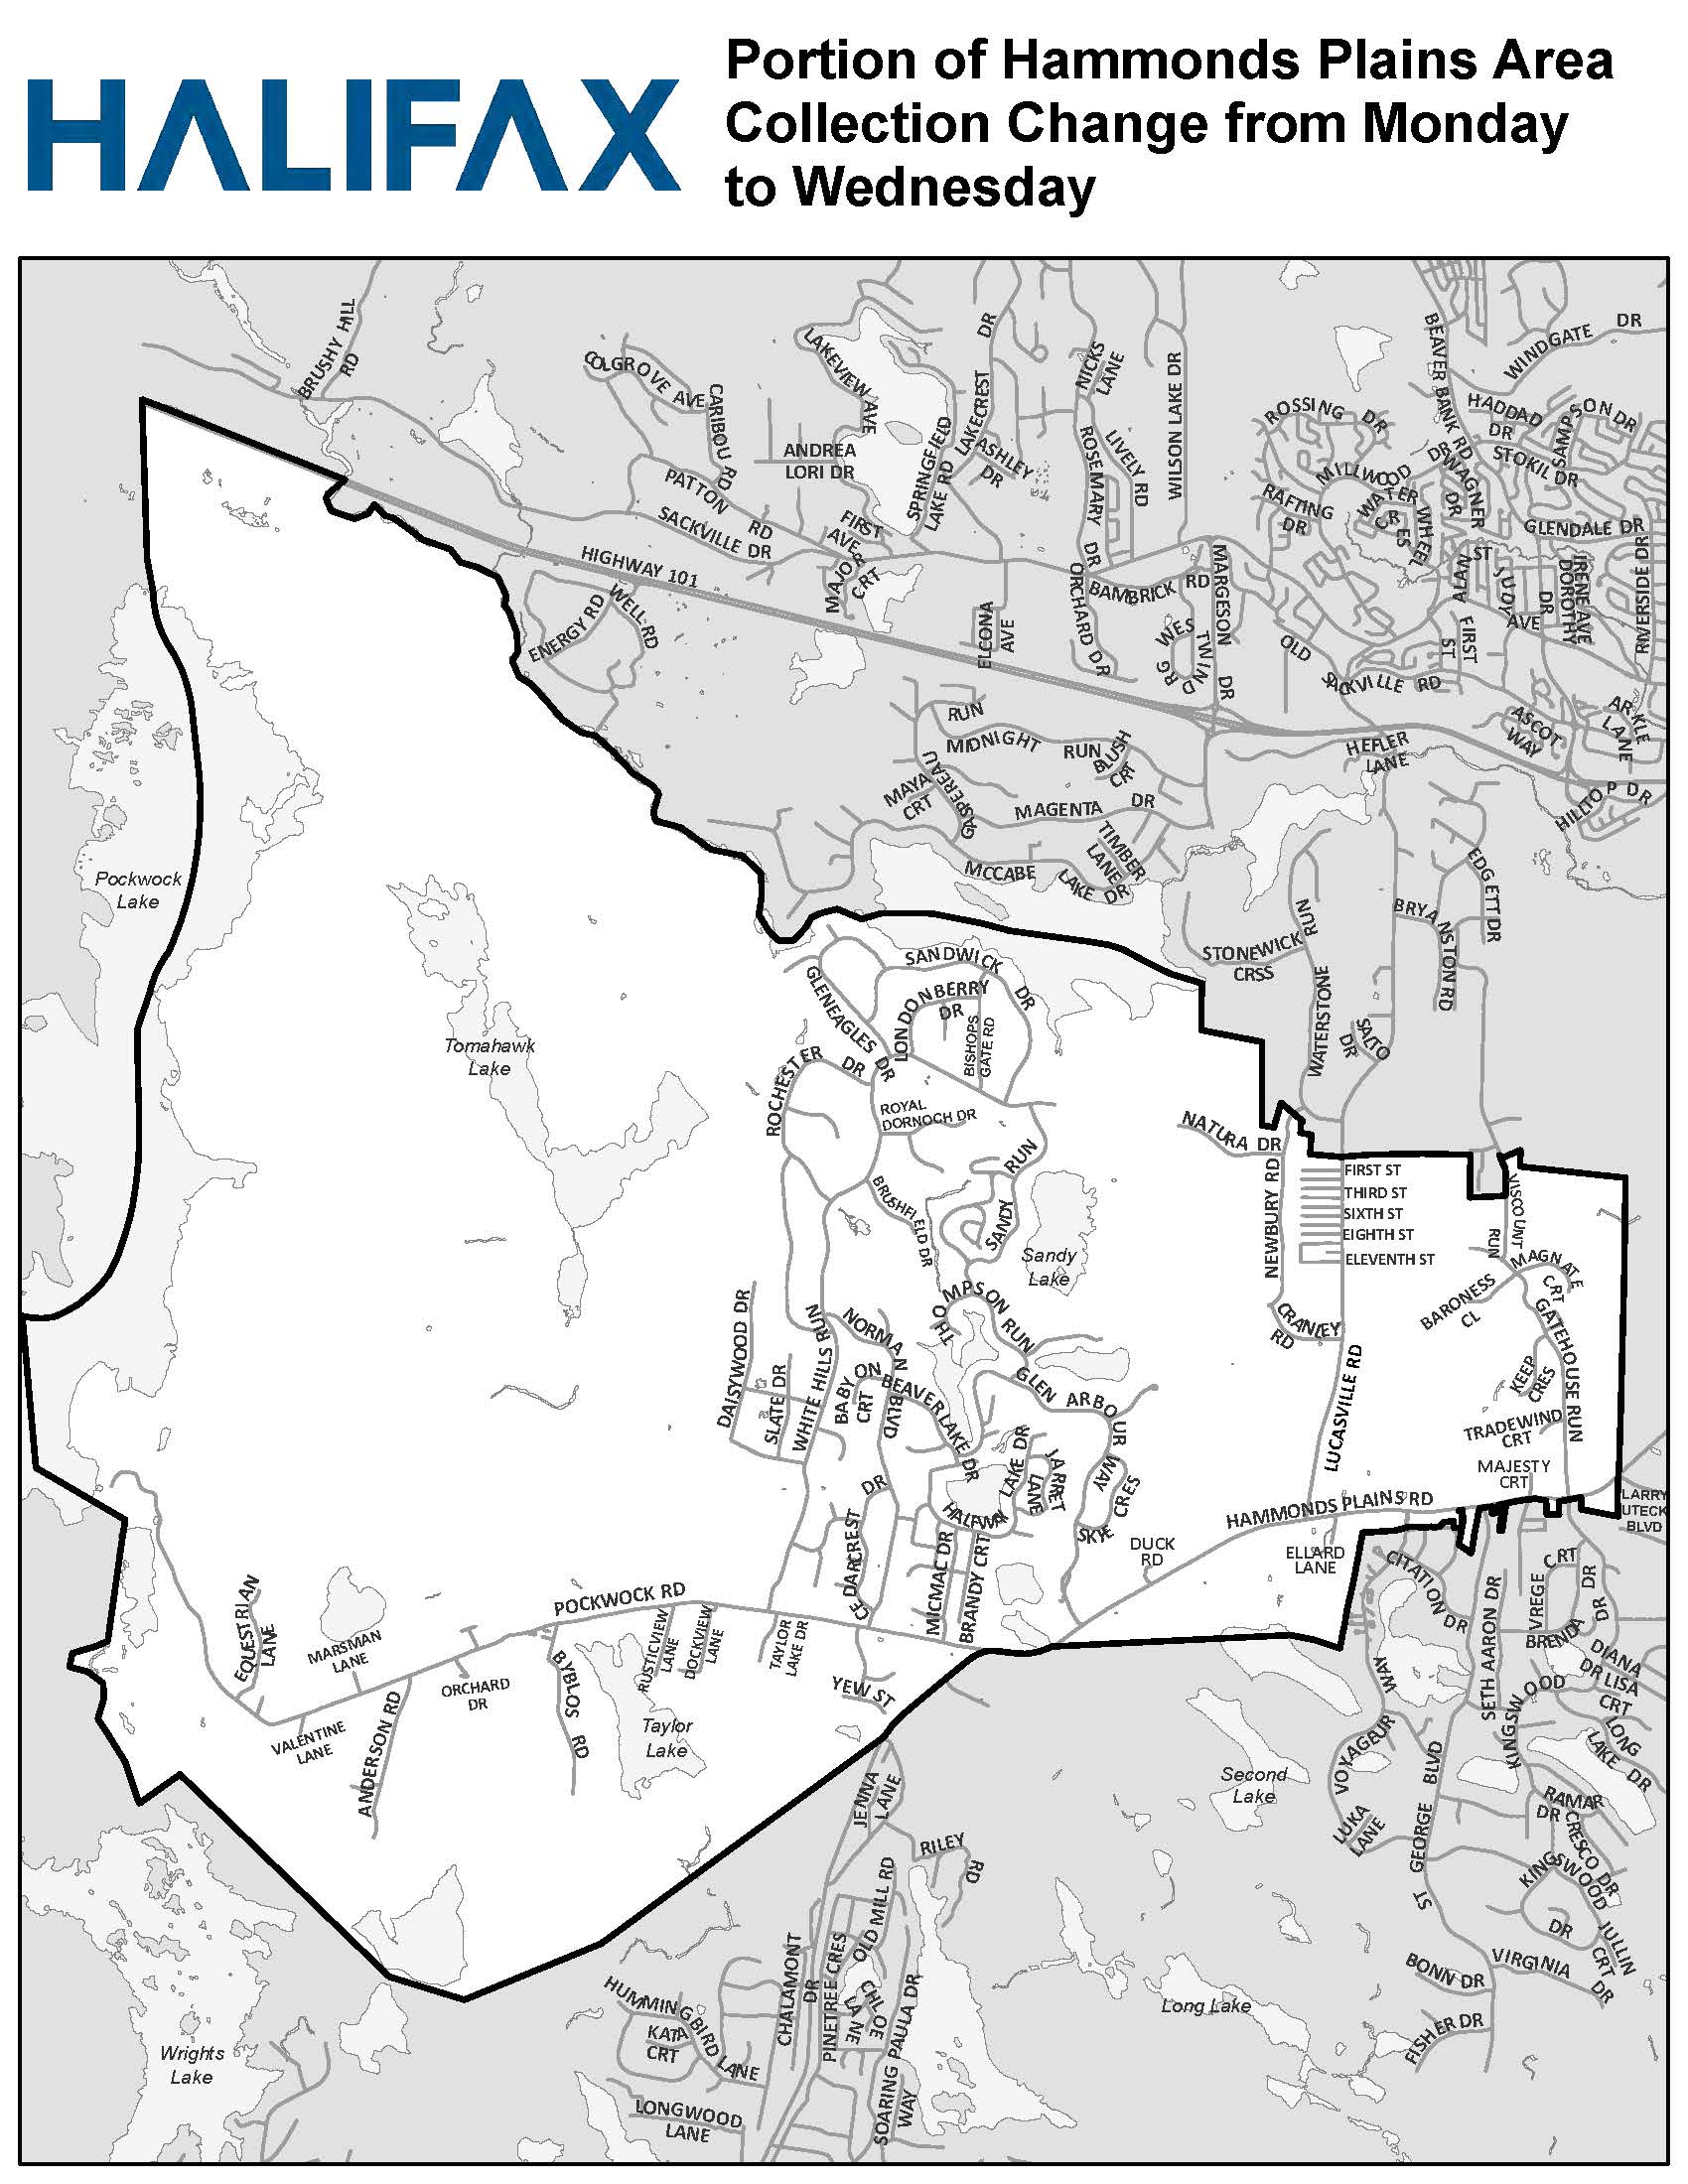 Portion of Hammonds Plains area collection change from Monday to Wednesday (unshaded)